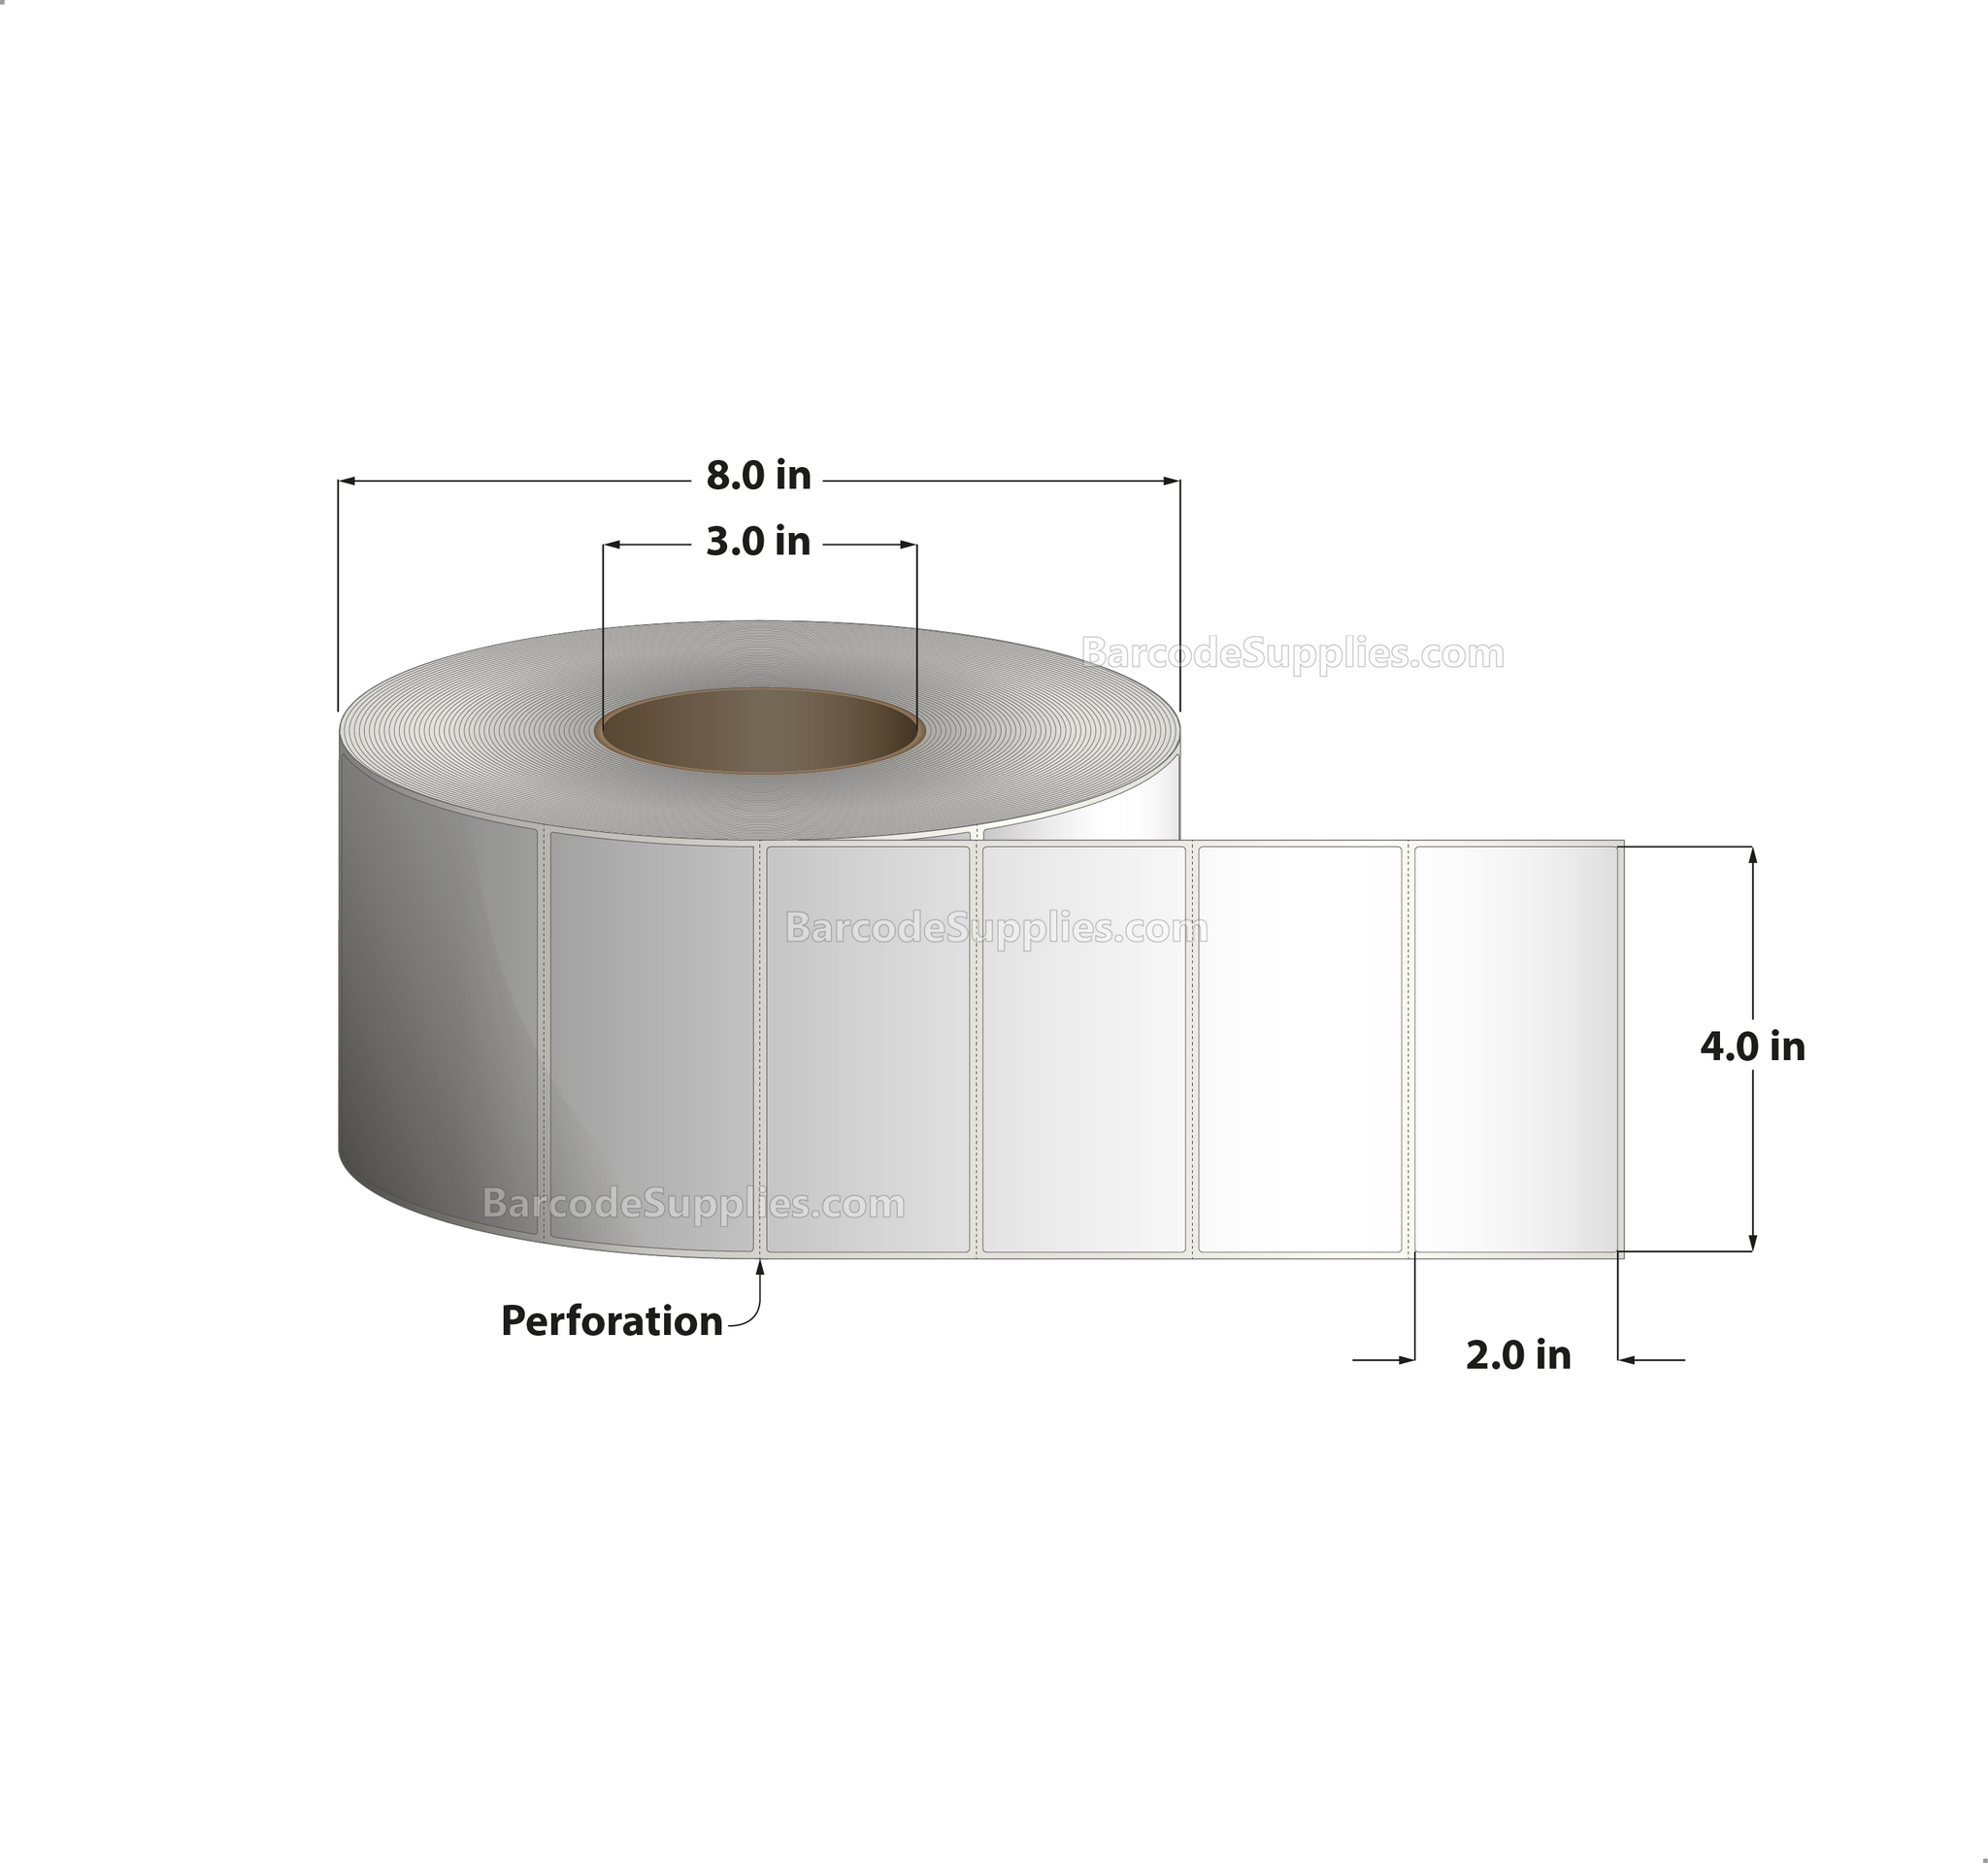 4 x 2 Thermal Transfer White Labels With Permanent Adhesive - Perforated - 3000 Labels Per Roll - Carton Of 4 Rolls - 12000 Labels Total - MPN: RP-4-2-3000-3